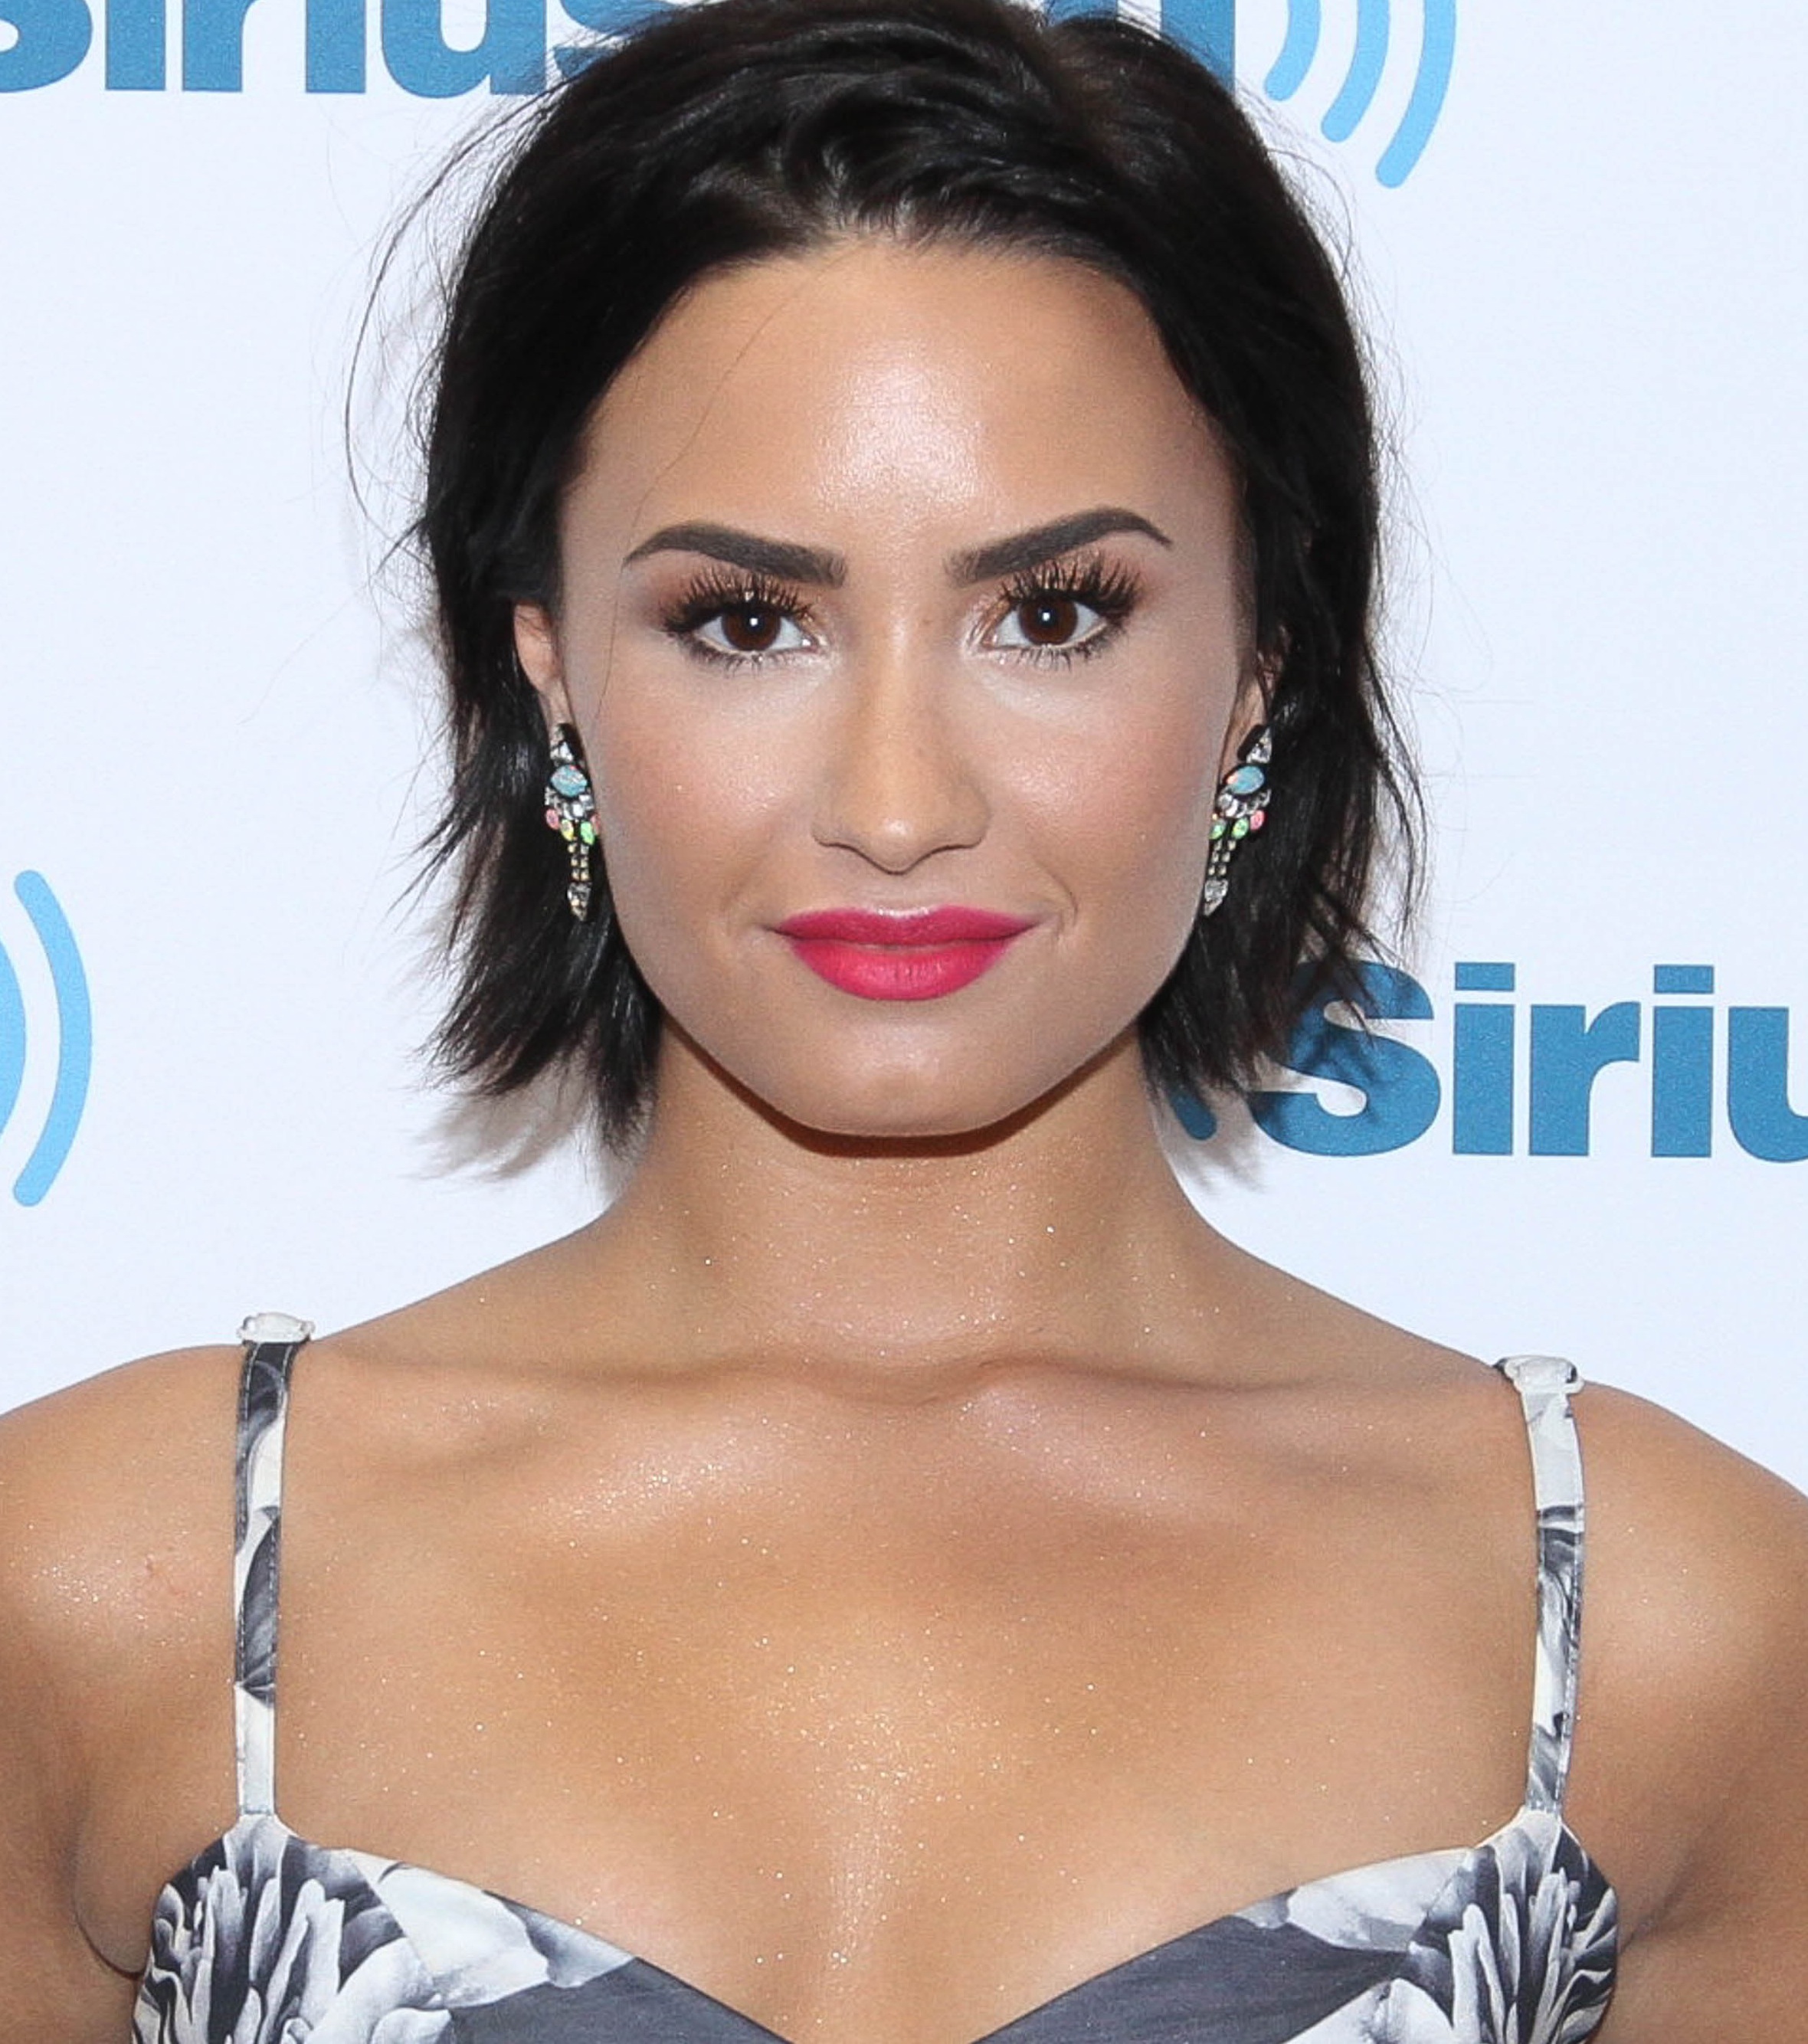 NEW YORK, NY - JULY 01: Demi Lovato visits at SiriusXM Studios on July 1, 2015 in New York City. (Photo by Rob Kim/Getty Images)